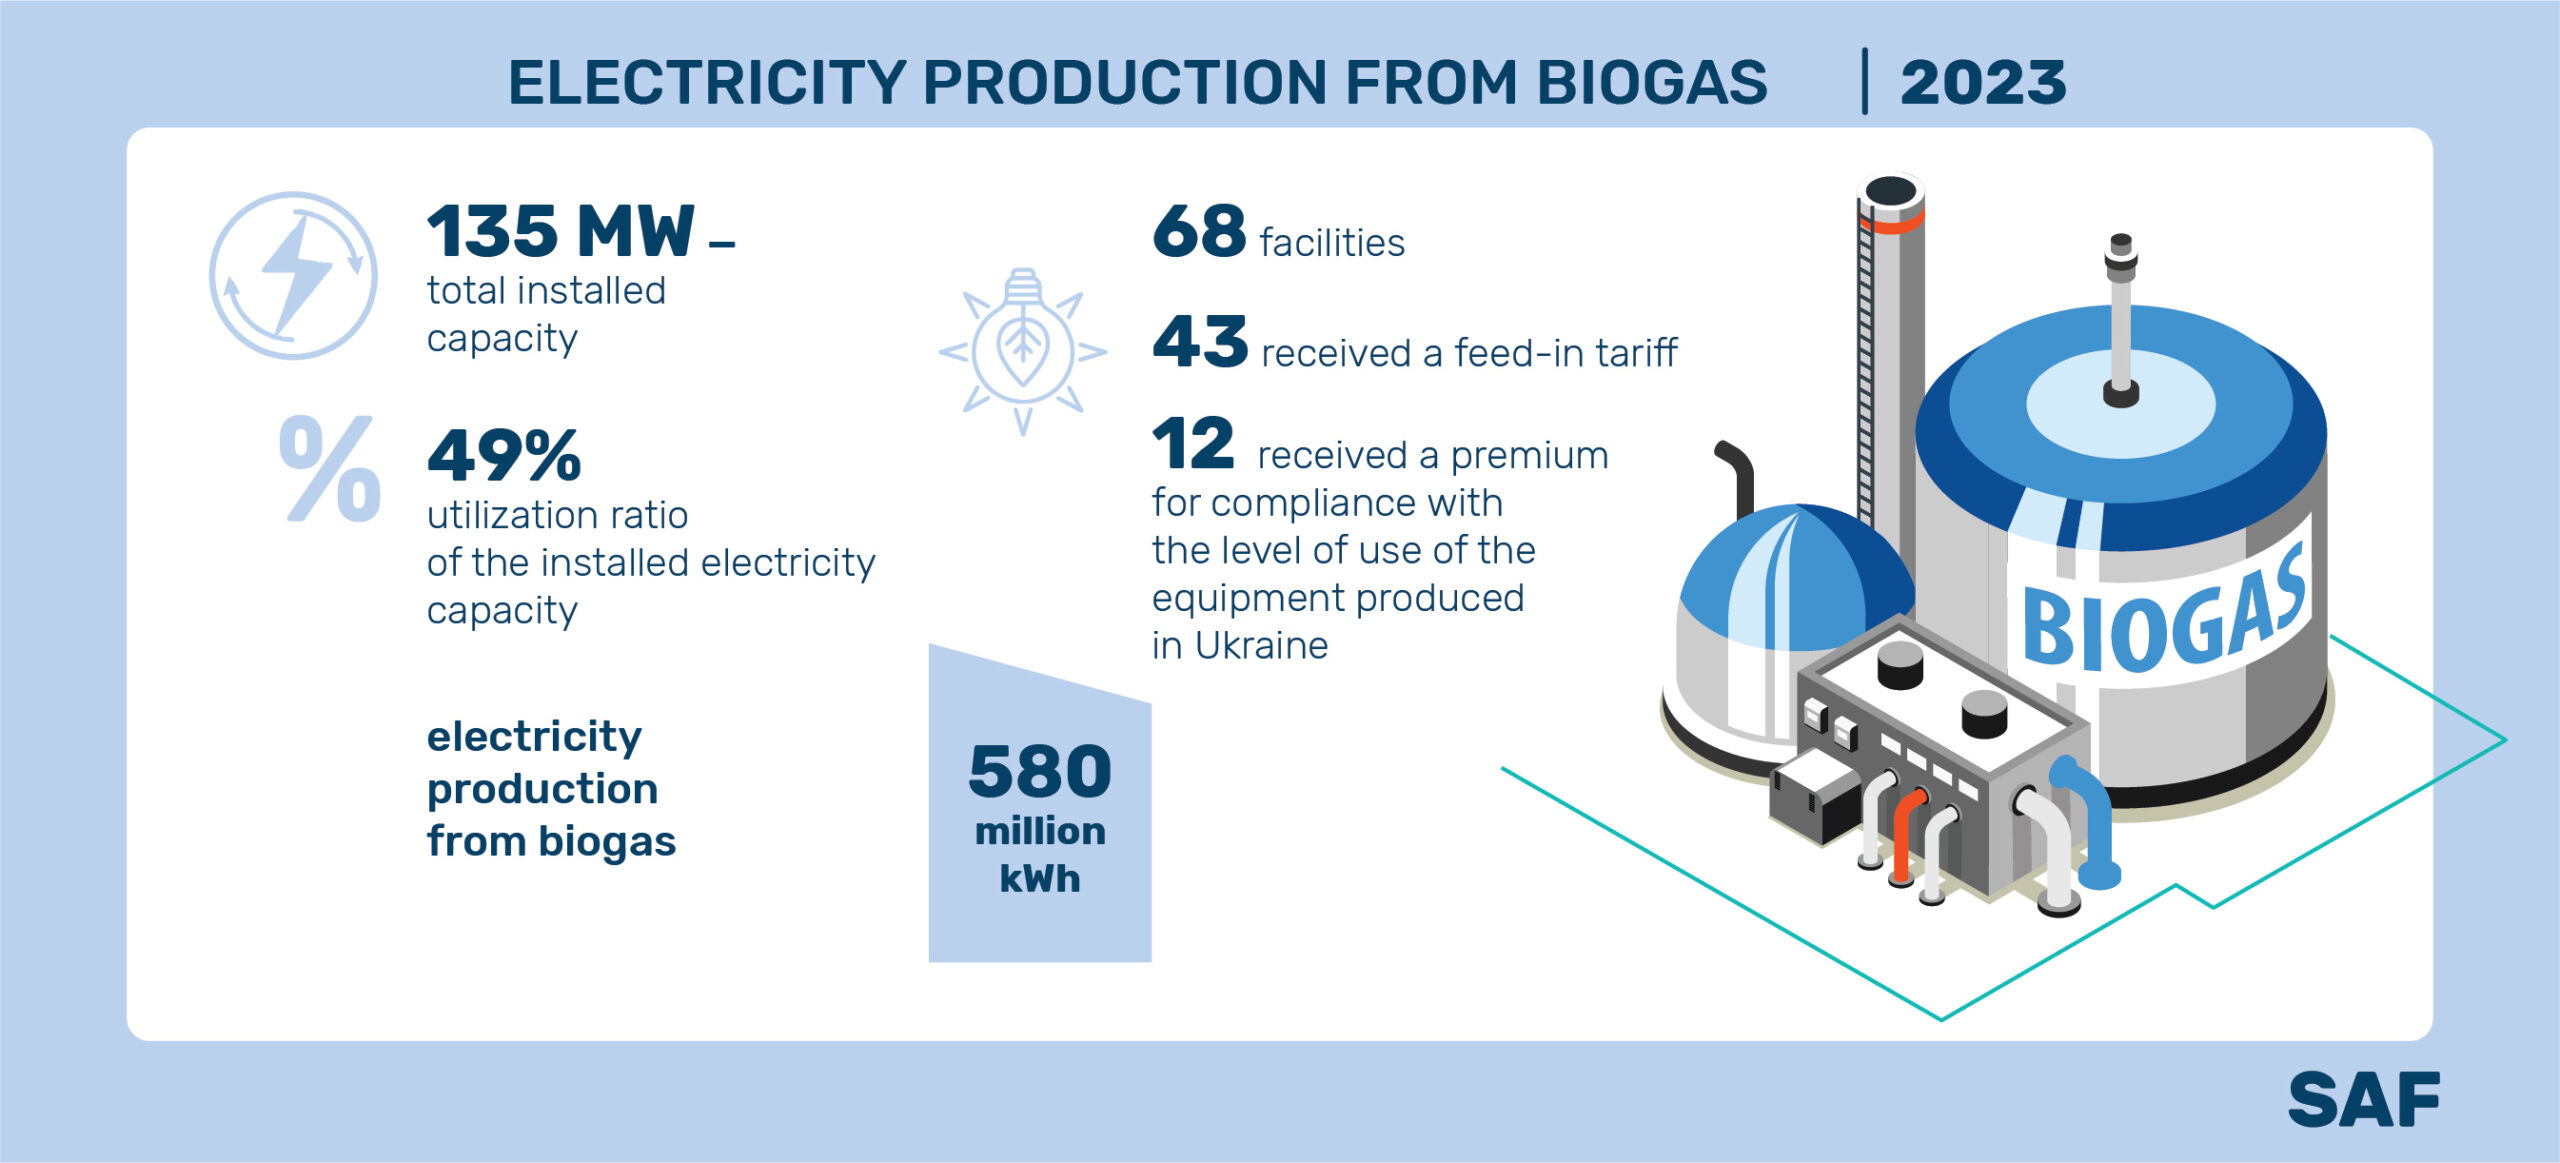 Electricity production from biogas